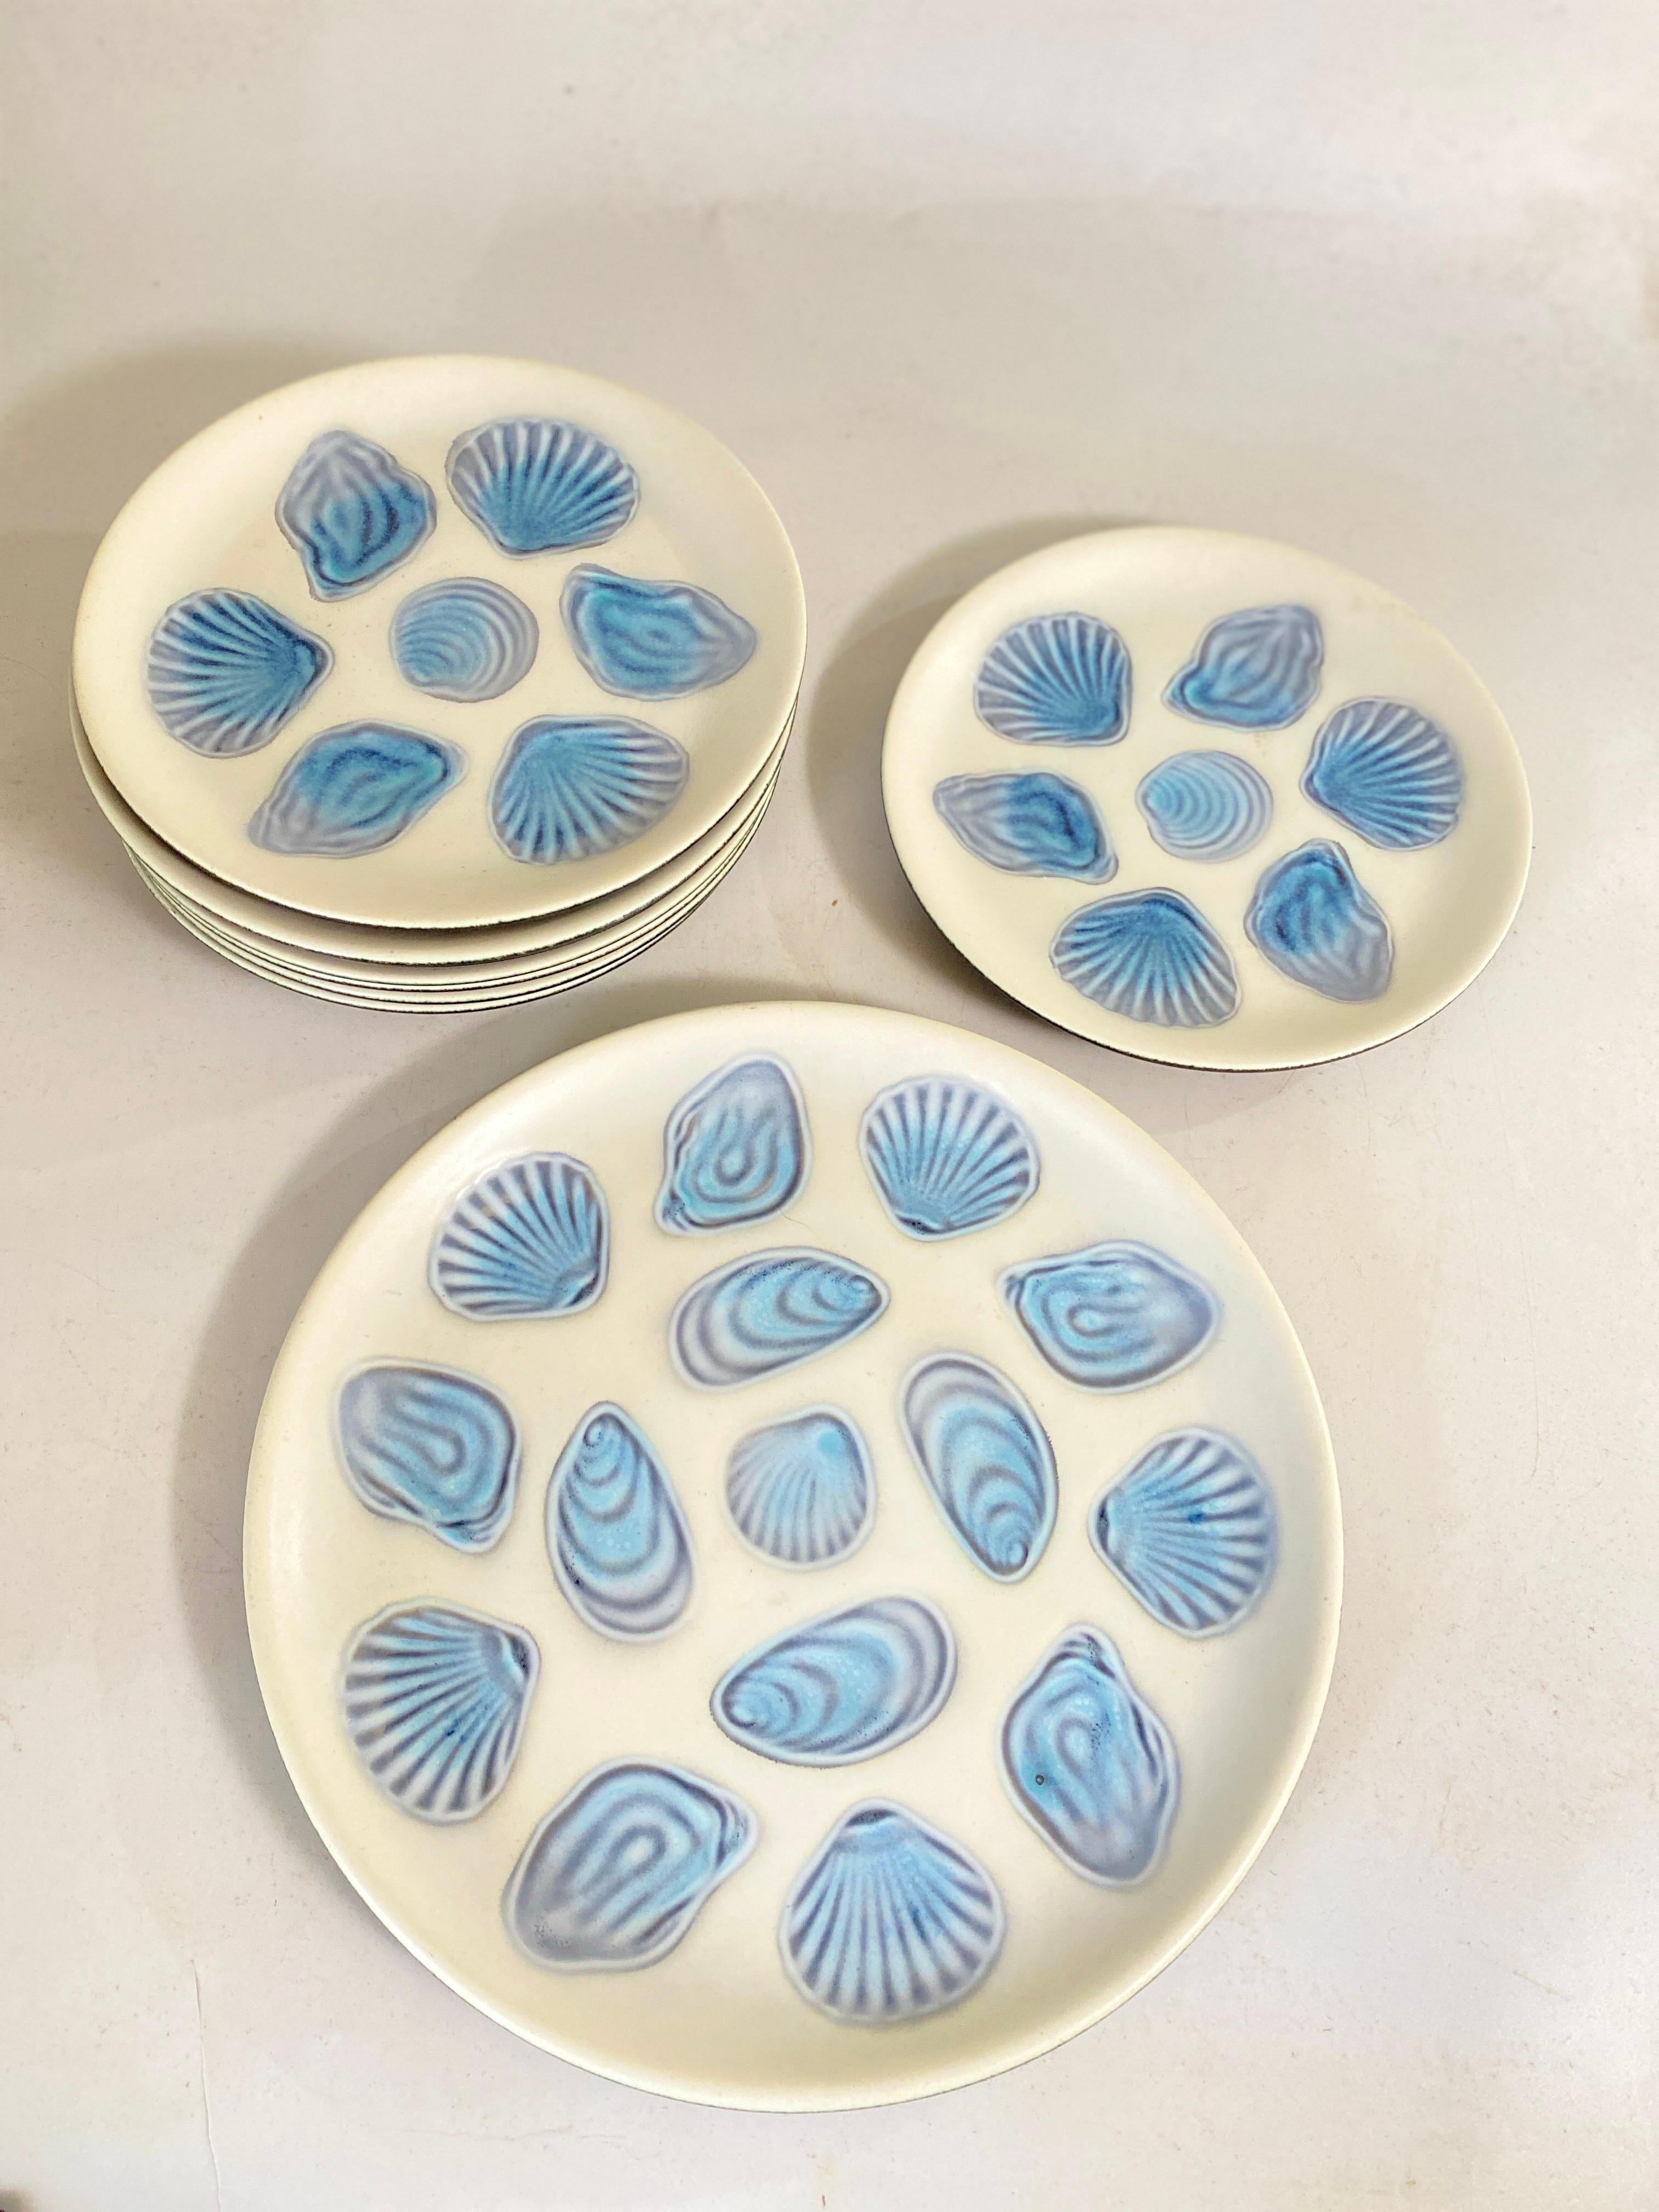 2 Large Oyster Plates and 6 Plates in Ceramic Blue and White France by Elchinger For Sale 4